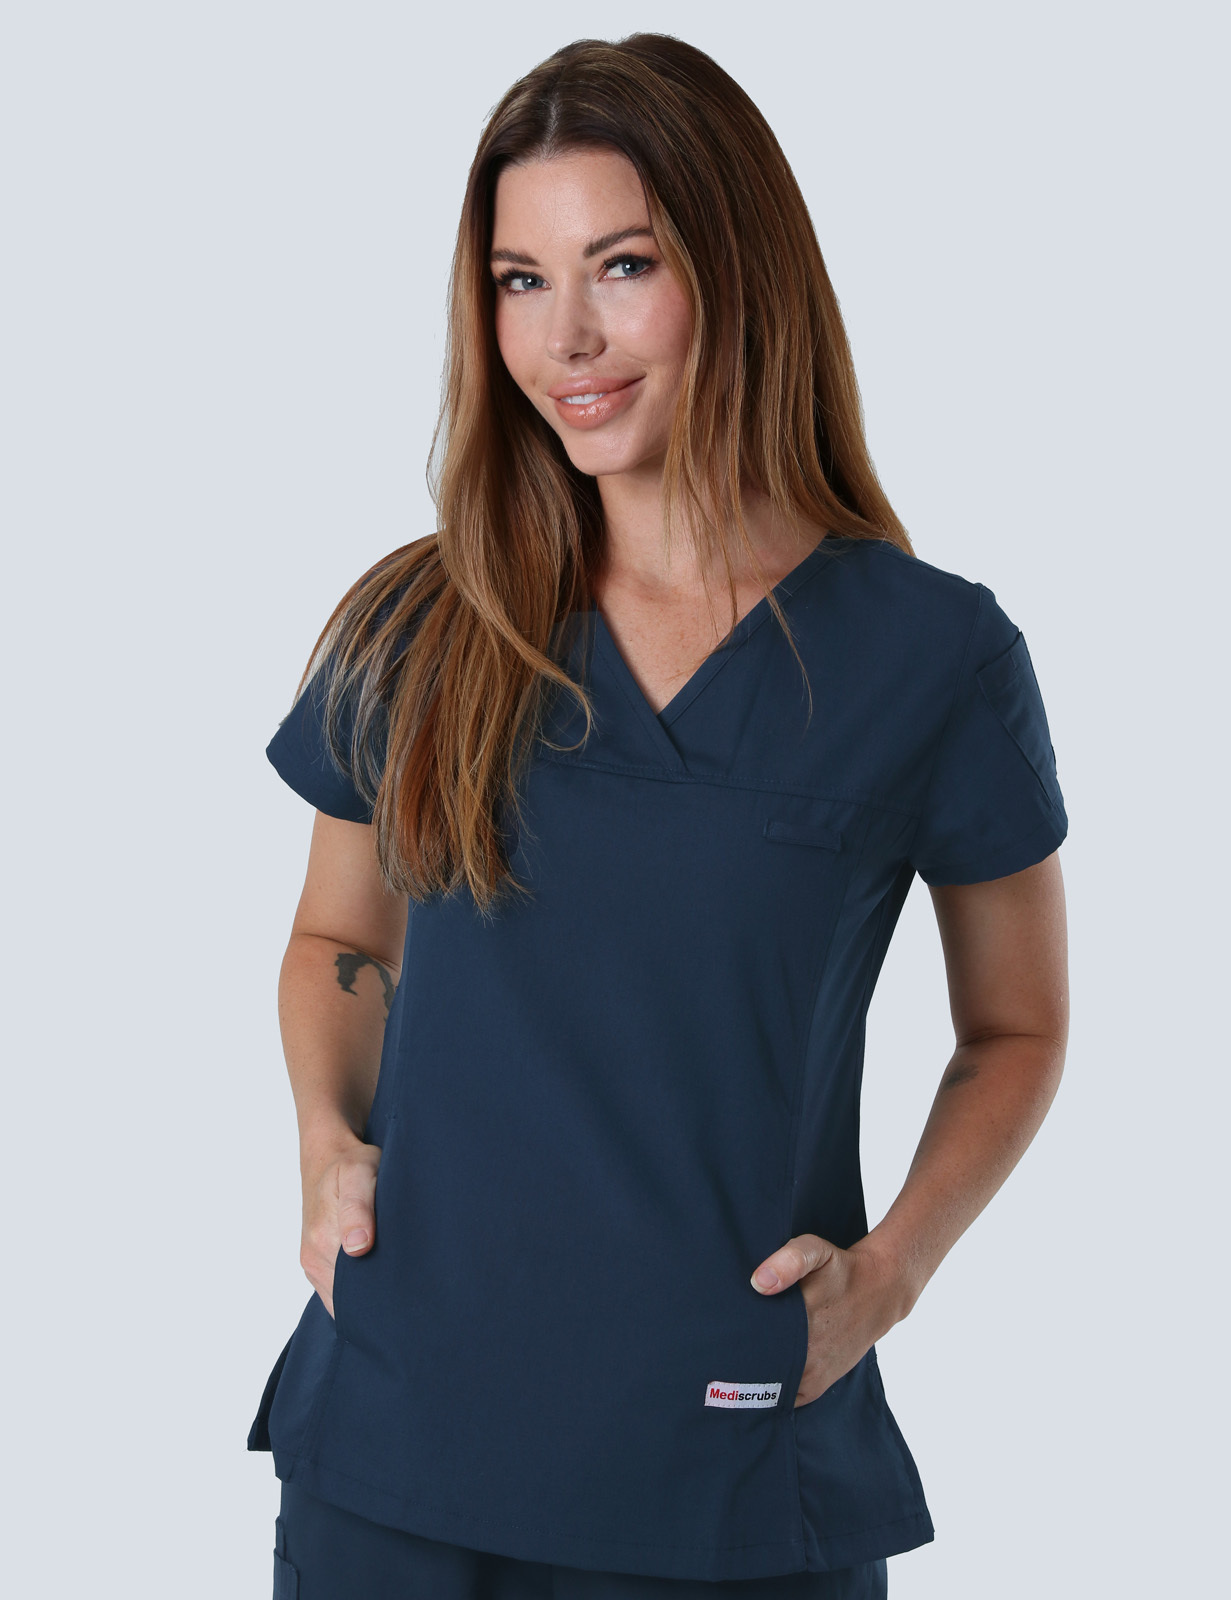 Frankston - AAAU/ANM (Women's Fit Solid Scrub Top in Navy incl Logos)